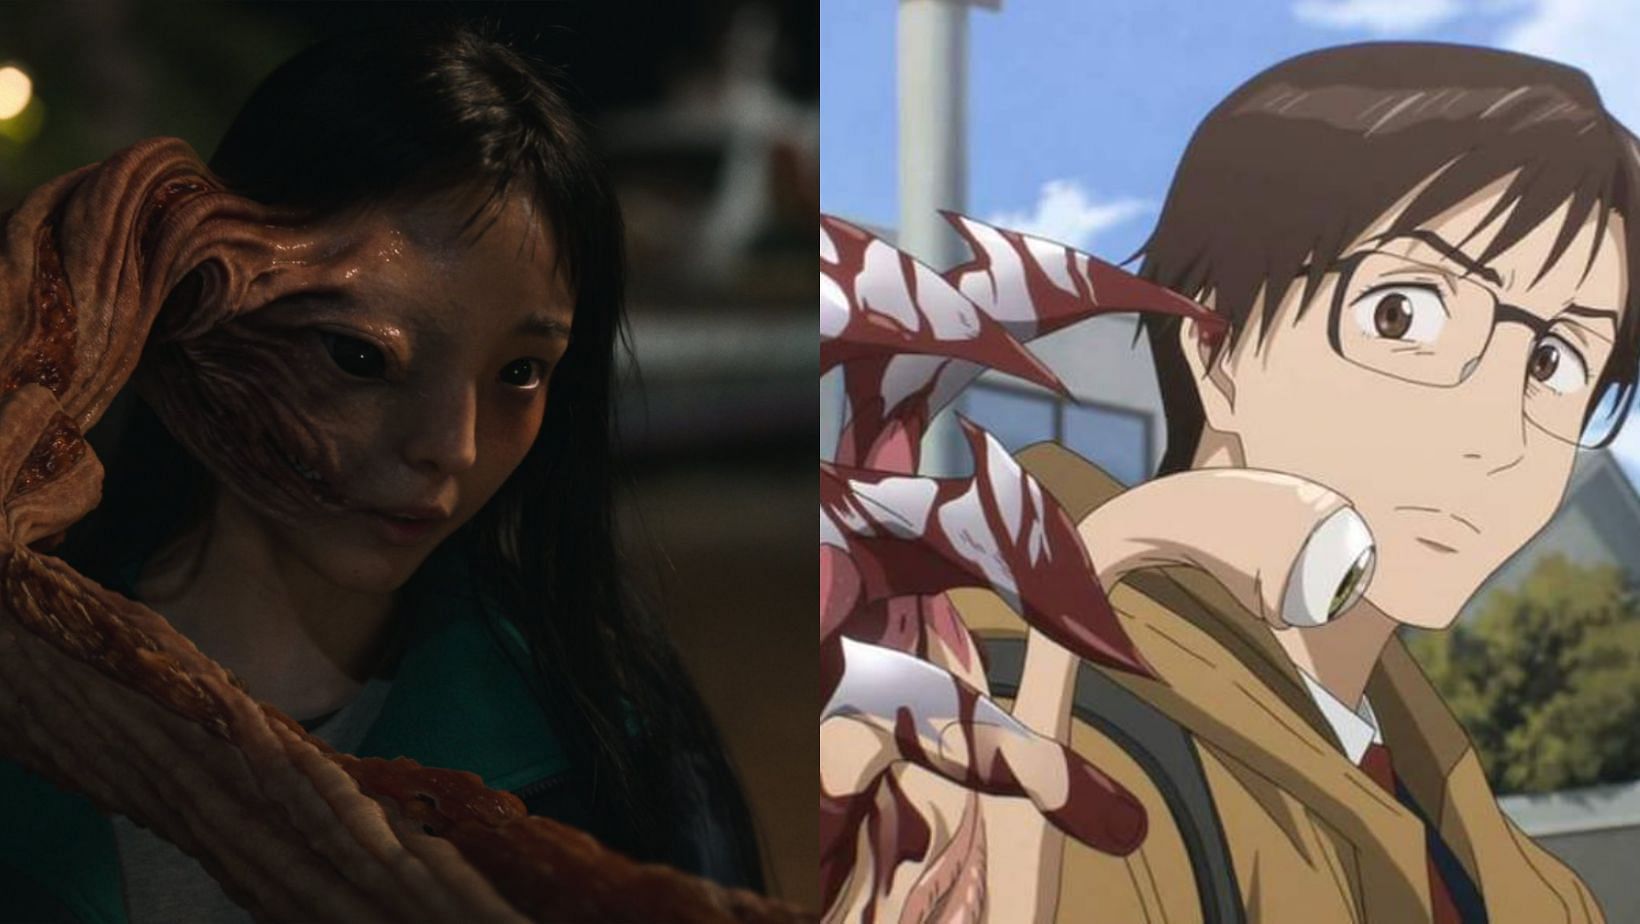 Parasyte: The Grey - The key differences between Hitoshi Iwaaki&rsquo;s popular manga series and Netflix&rsquo;s K-drama. (Images via X/@Netflixkr and Instagram/@ officialparasytemaxim)